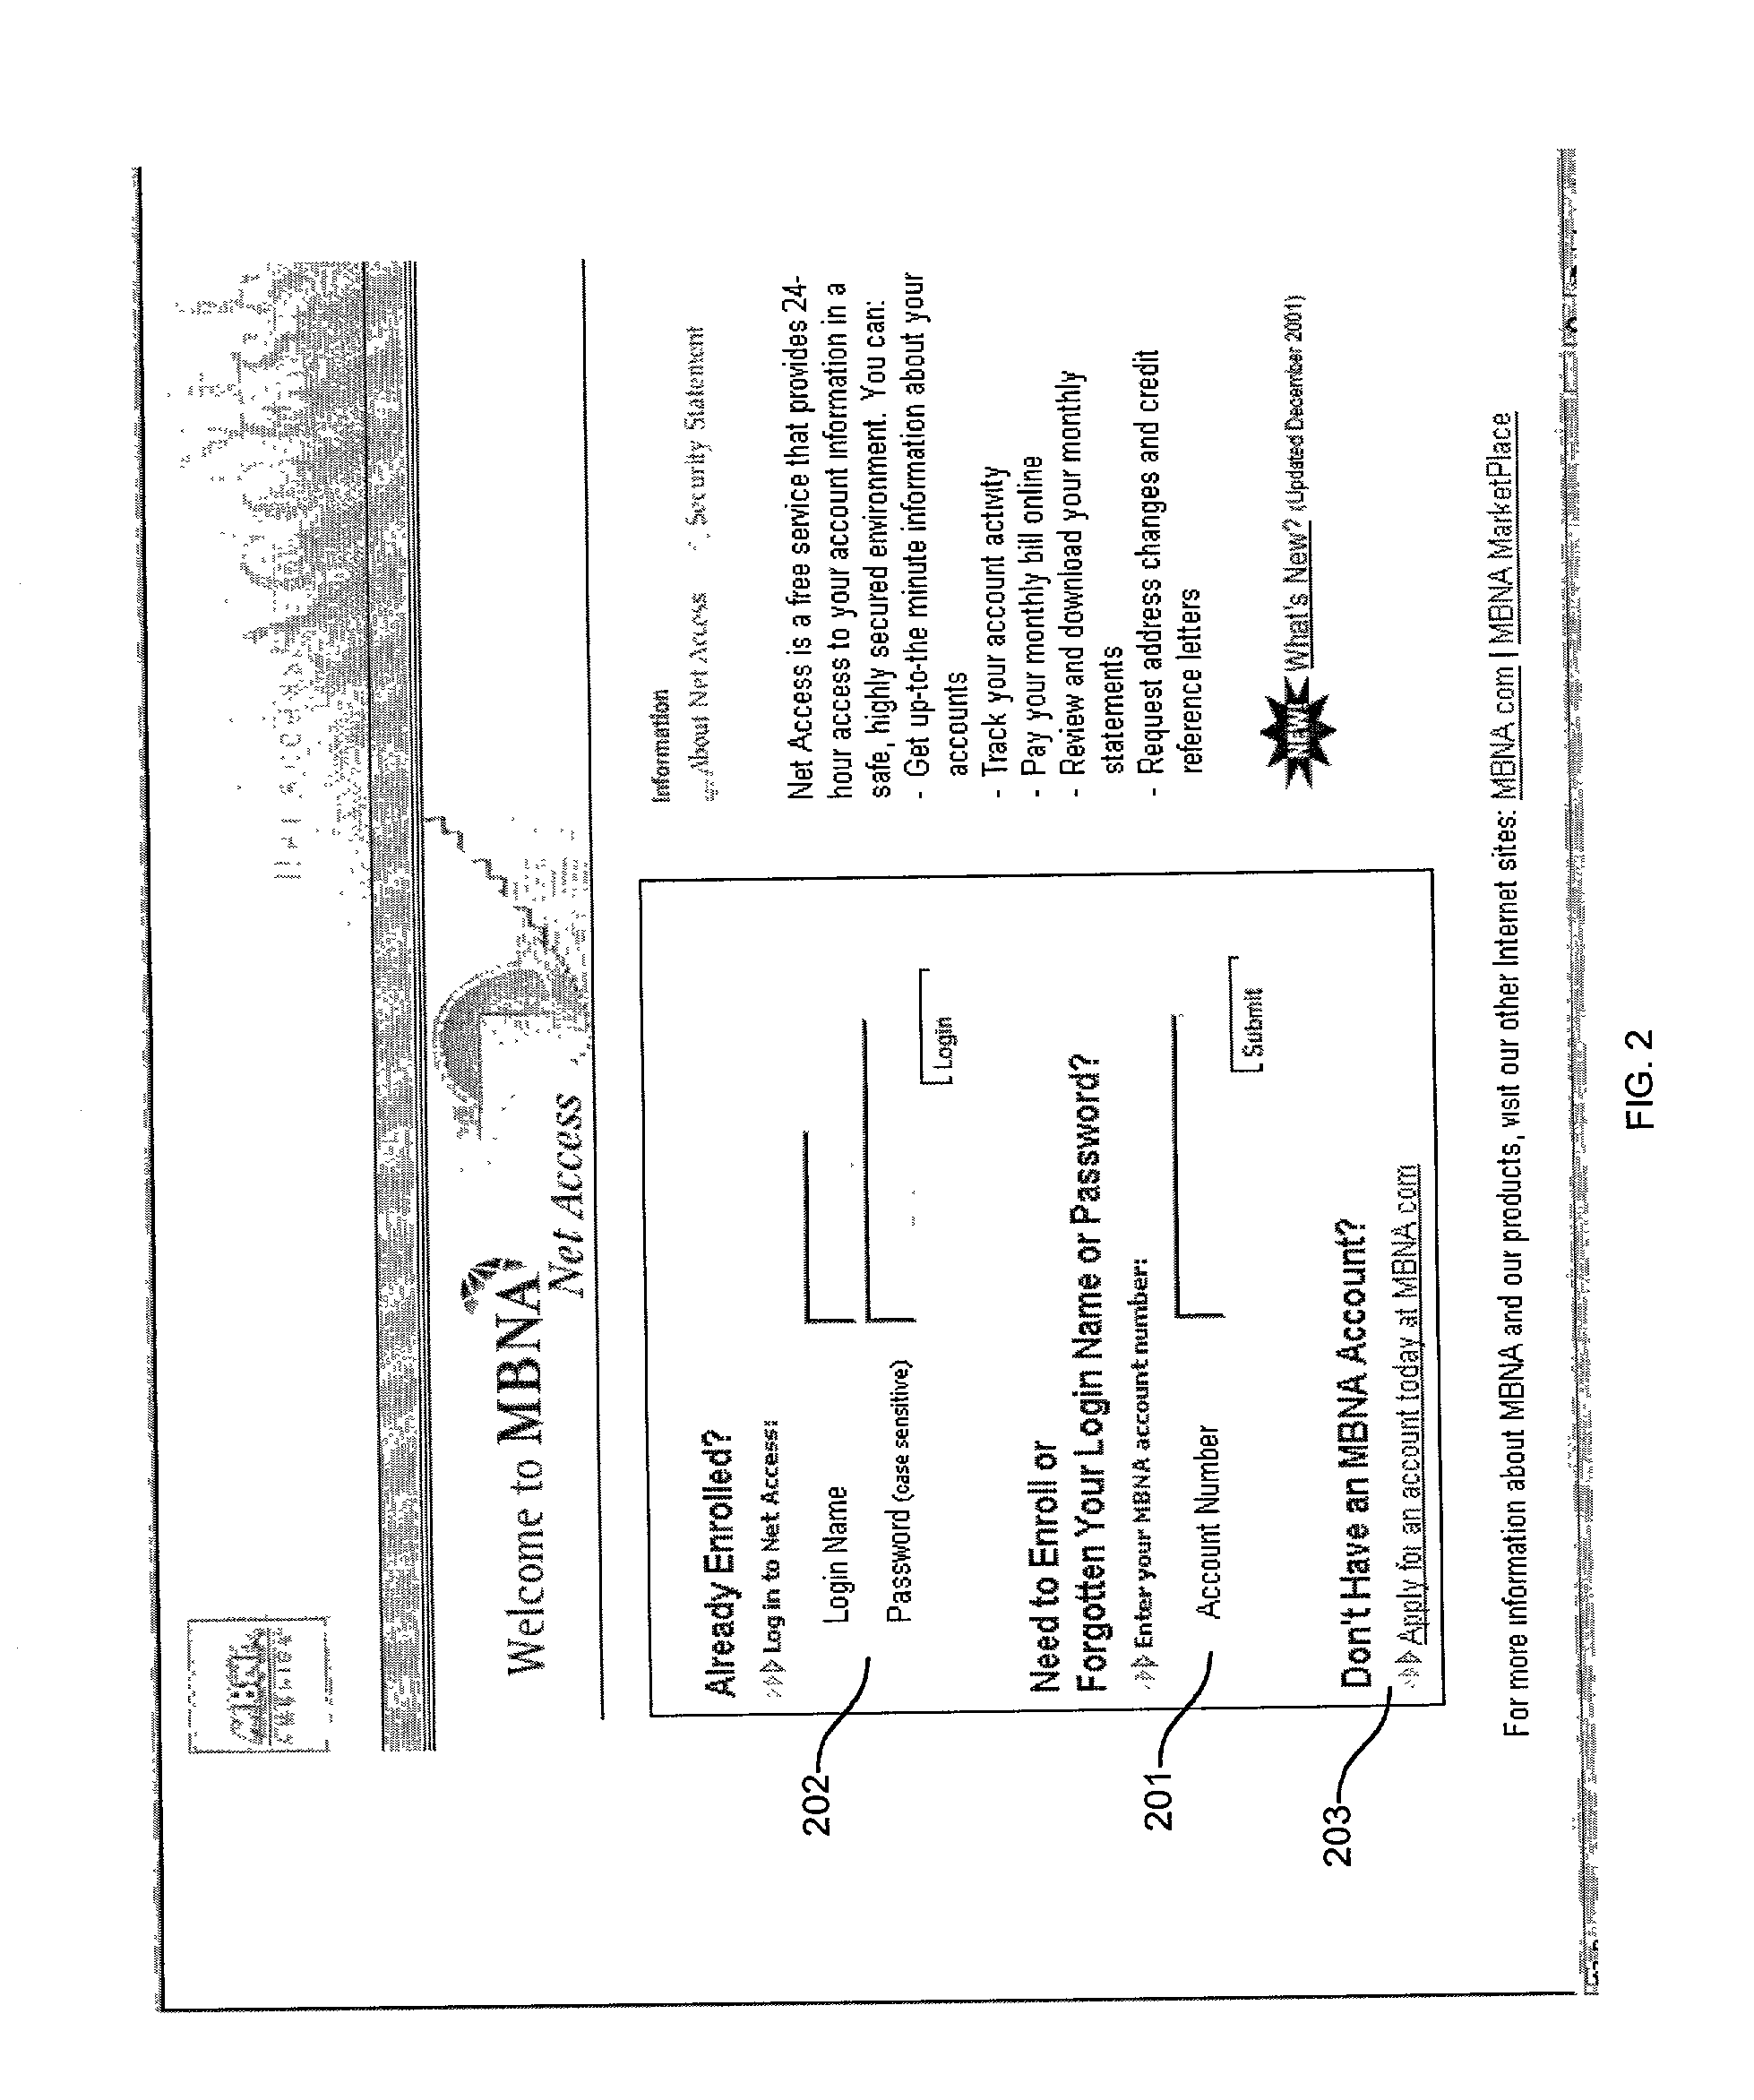 System for providing an online account statement having hyperlinks